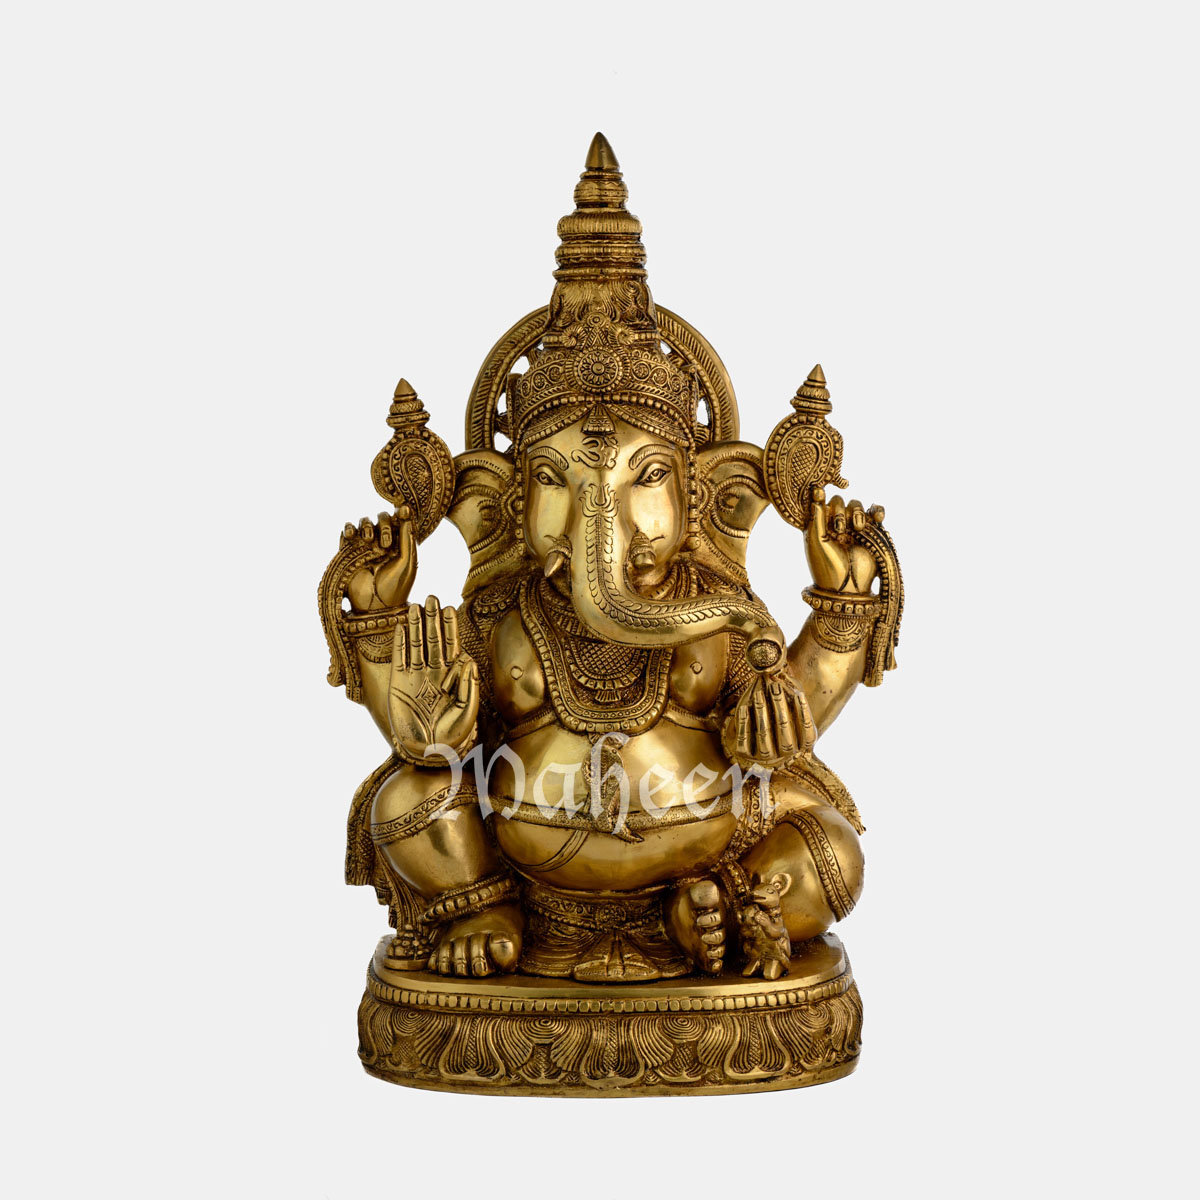 Brass Ganesha – With Ornate Head Work, Seated On Oval Carved Base